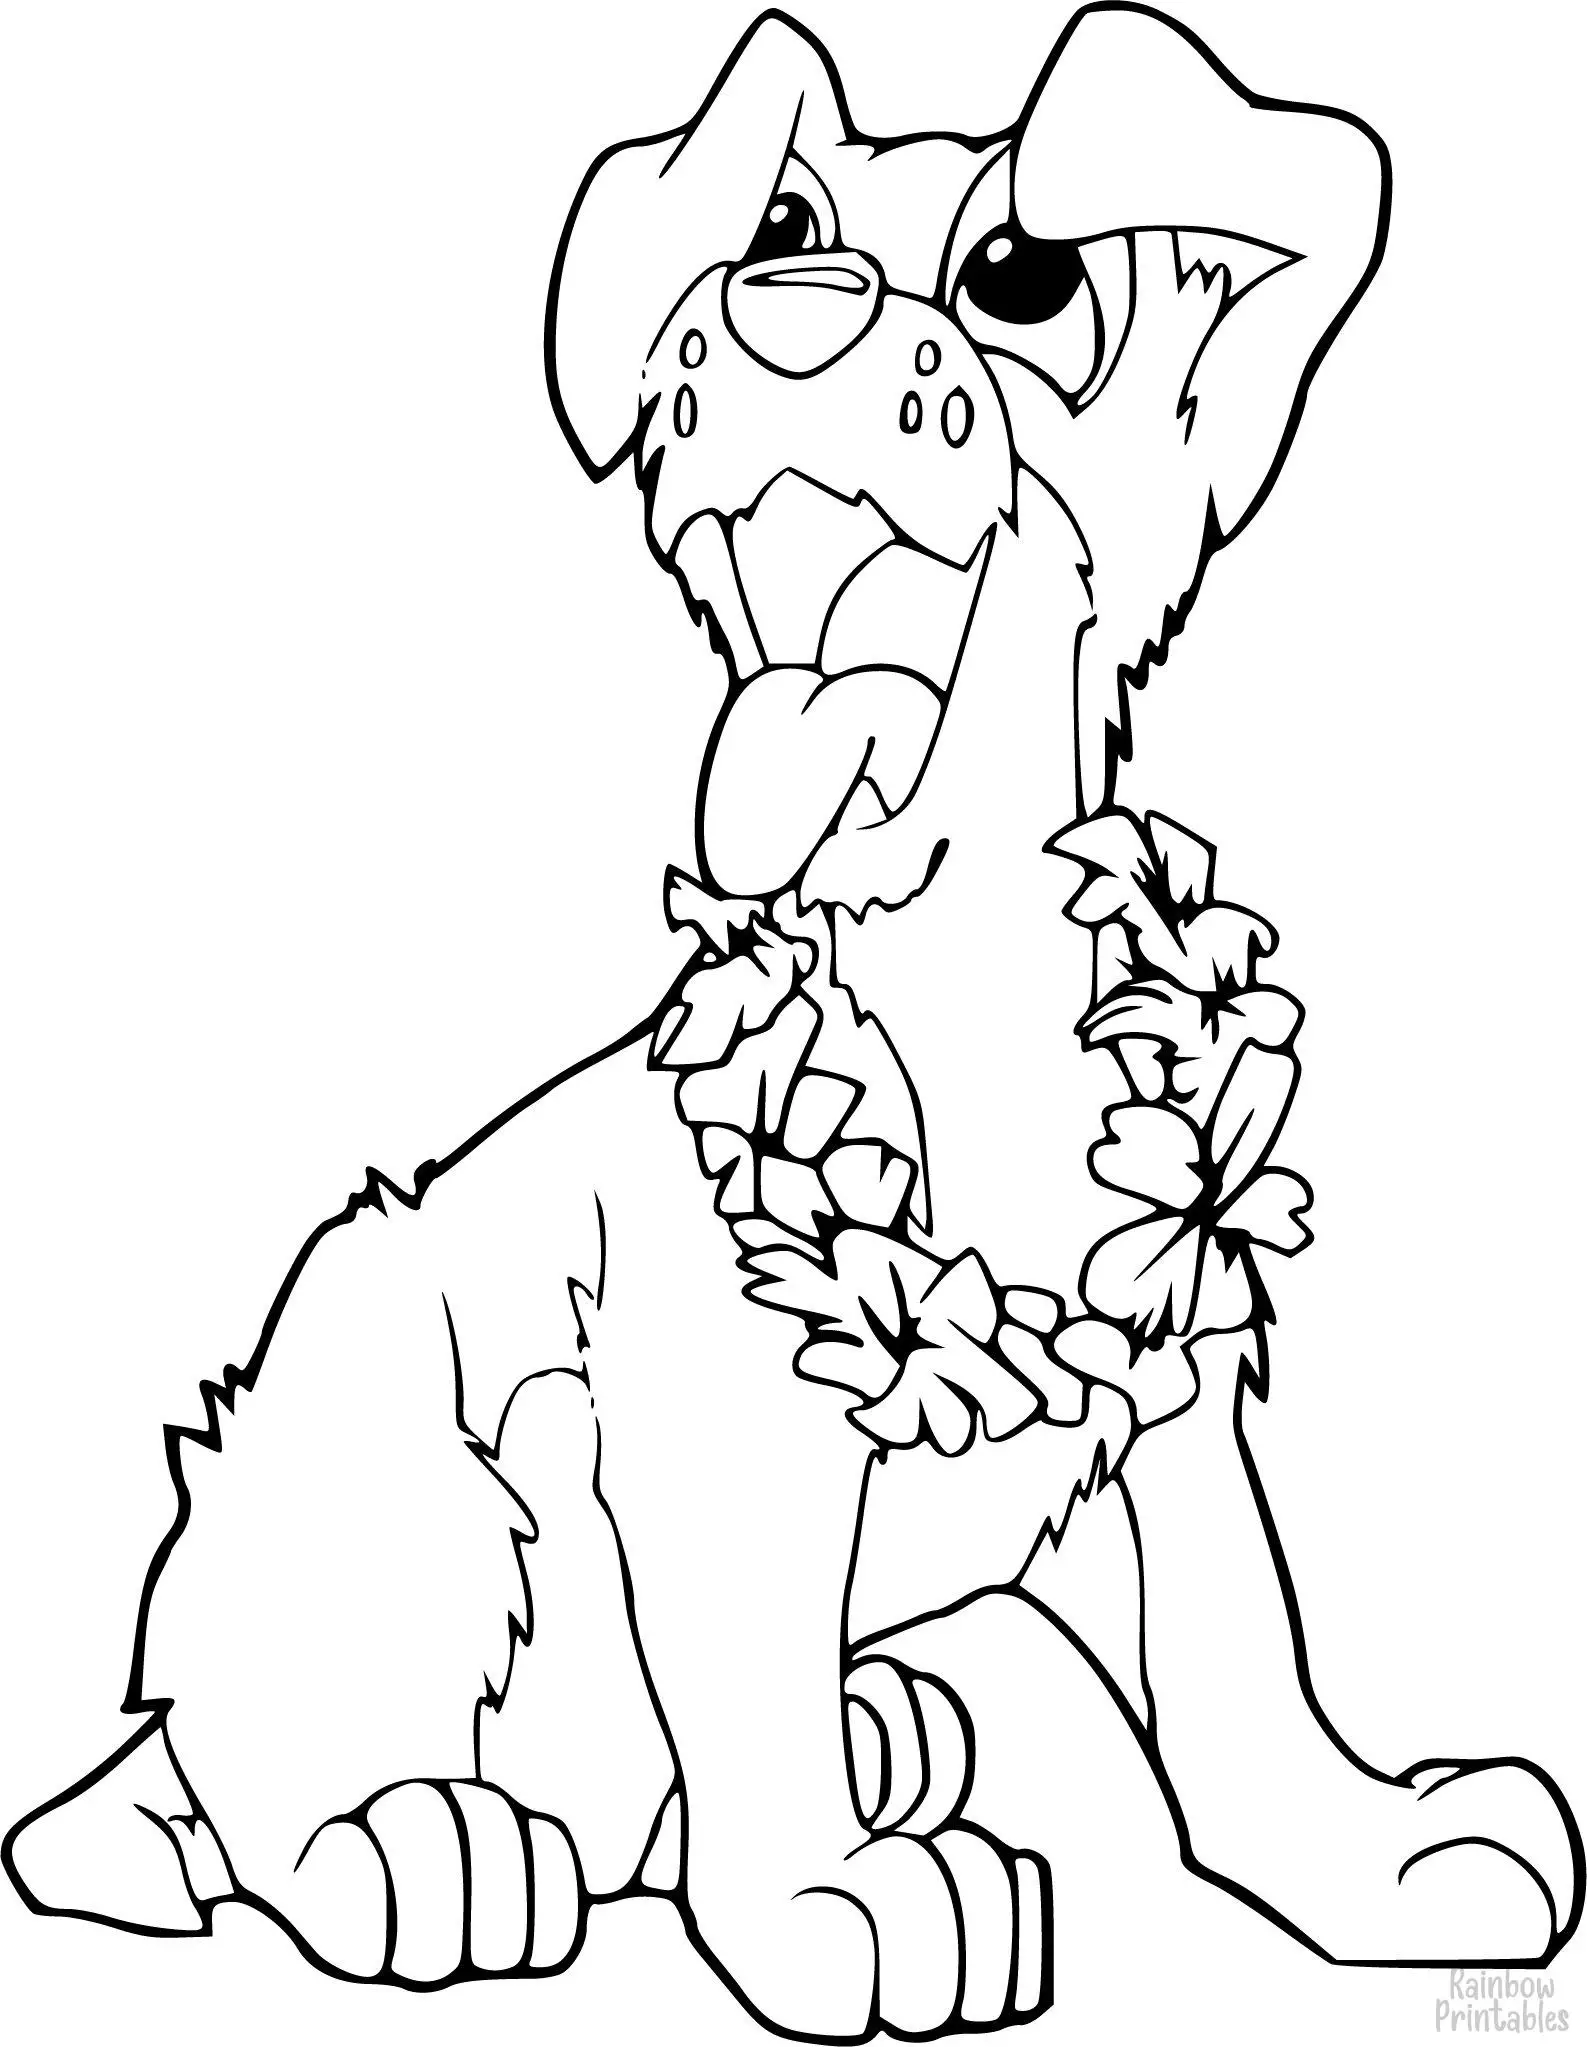 SIMPLE-EASY-line-drawings-Cute Hawaiian Dog-coloring-page-for-kids